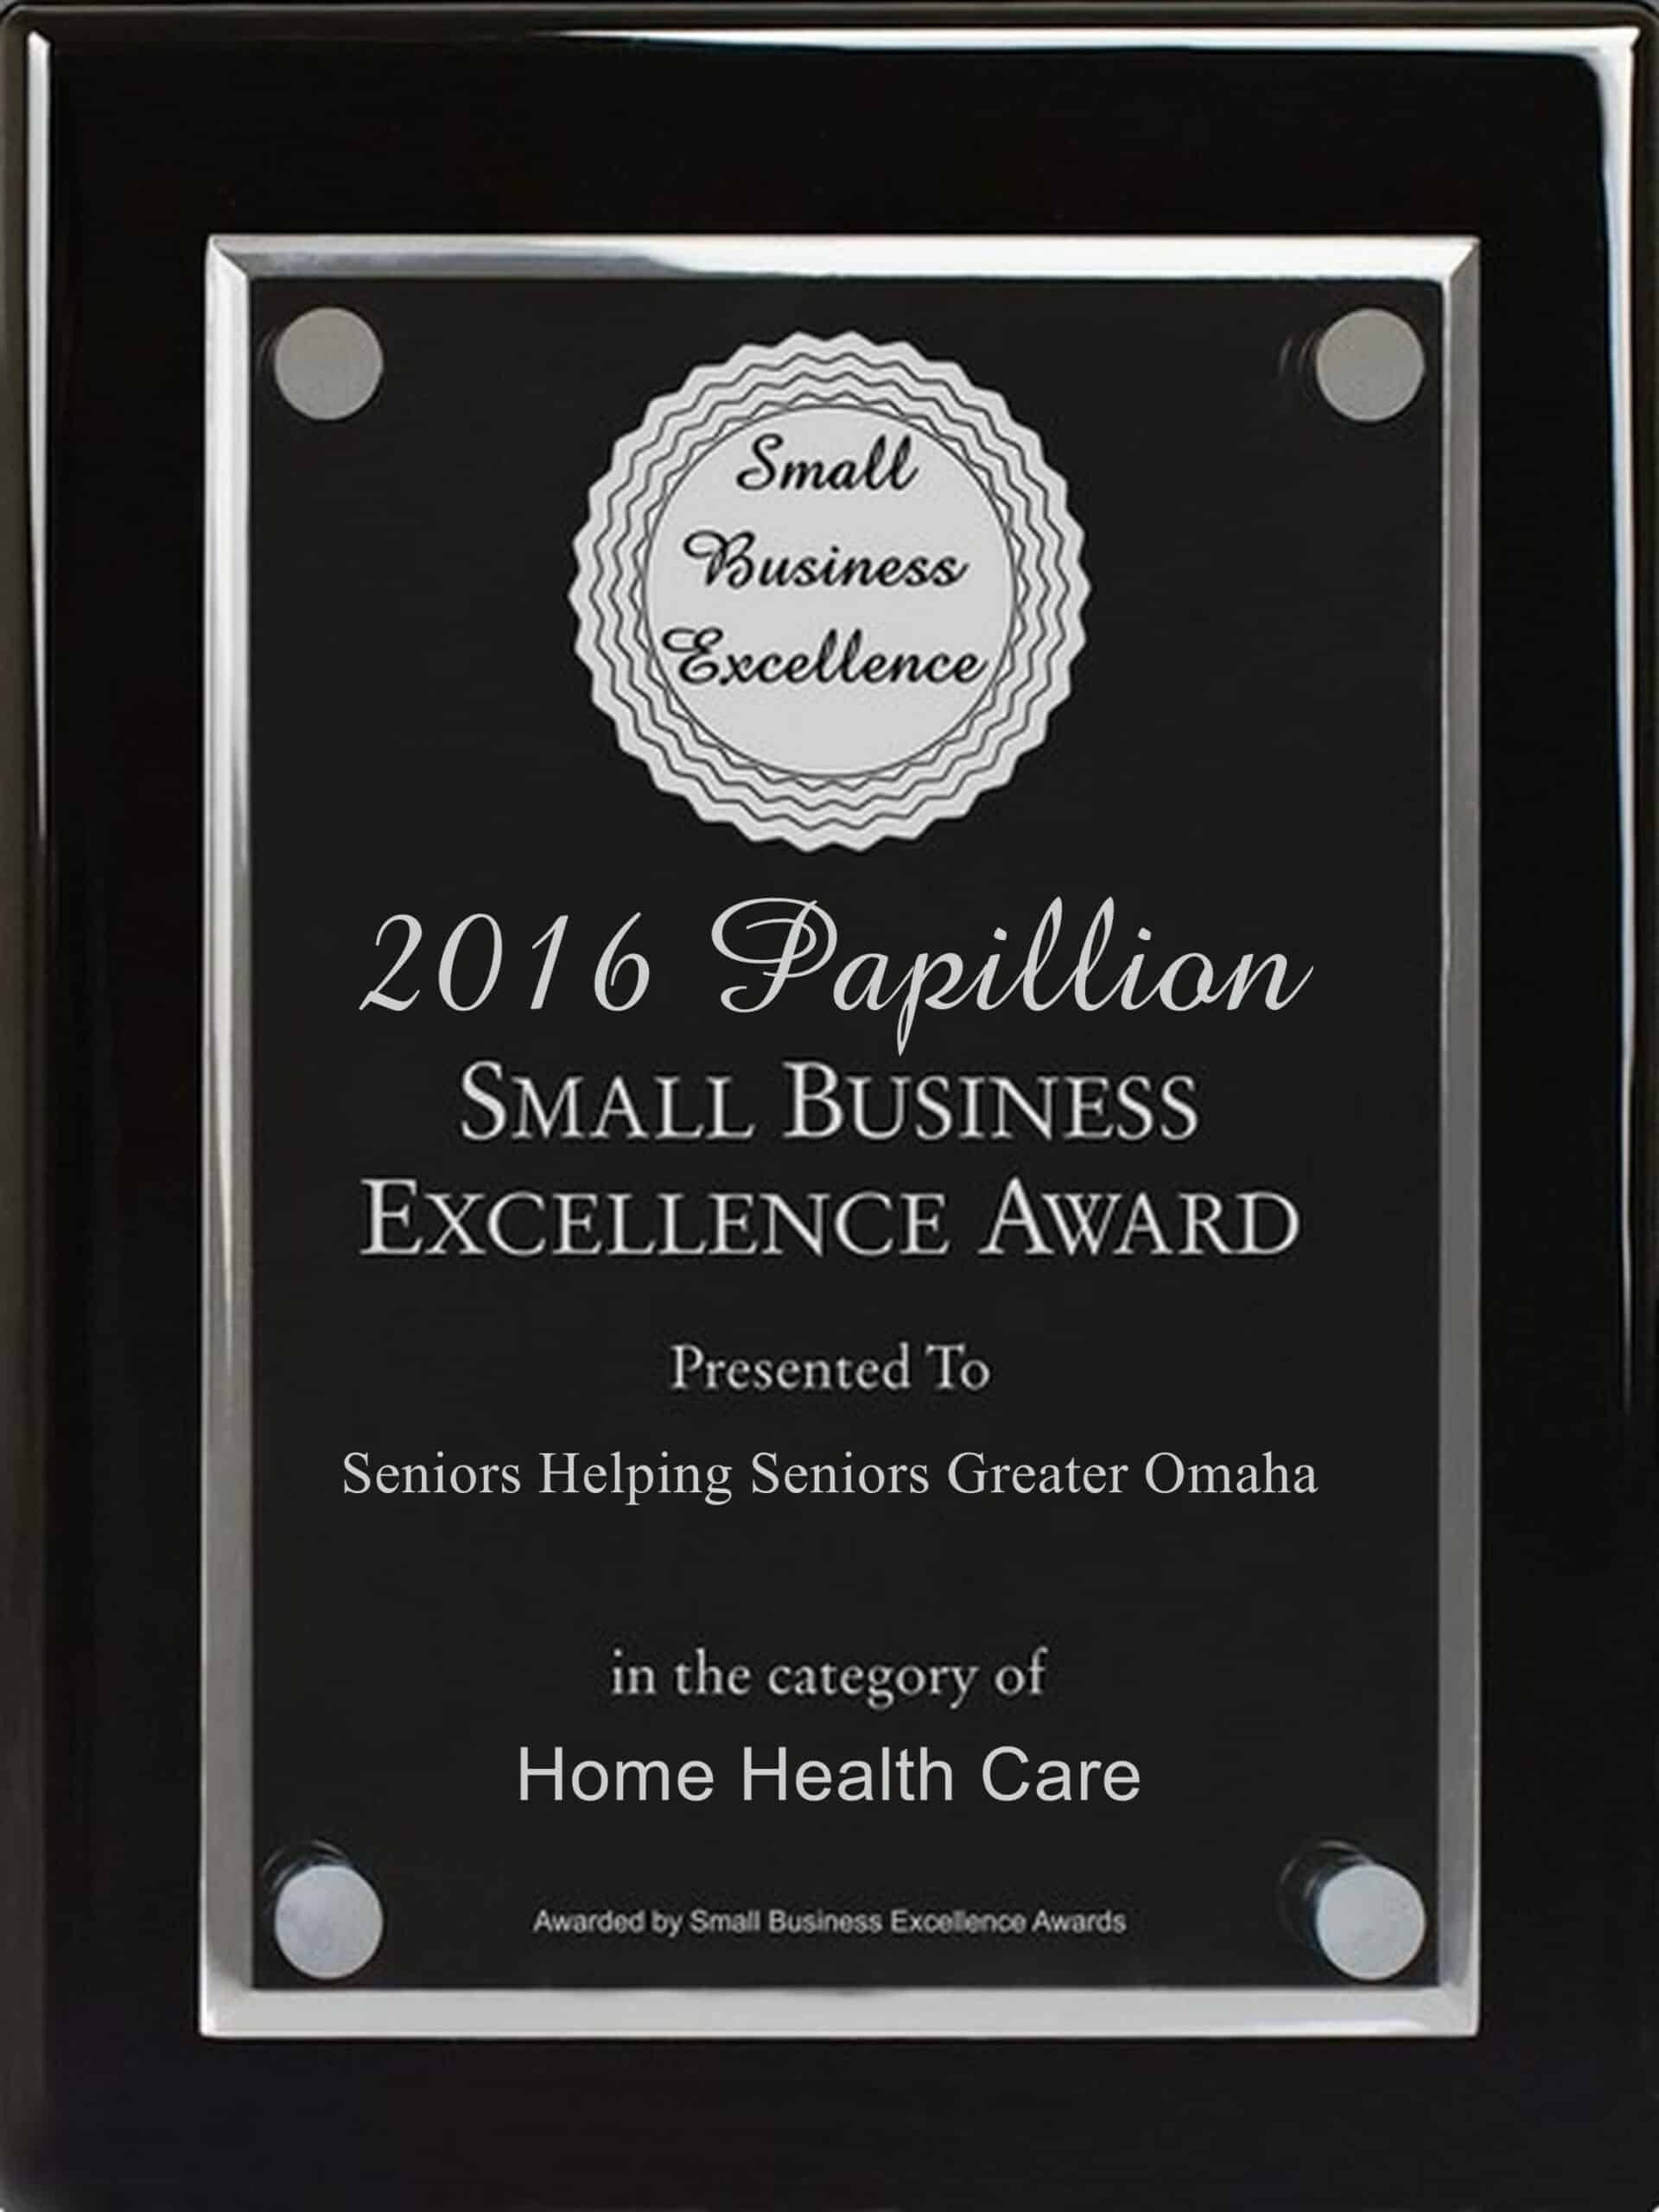 Seniors Helping Seniors Greater Omaha selected for 2016 Papillion Small Business Excellence Award